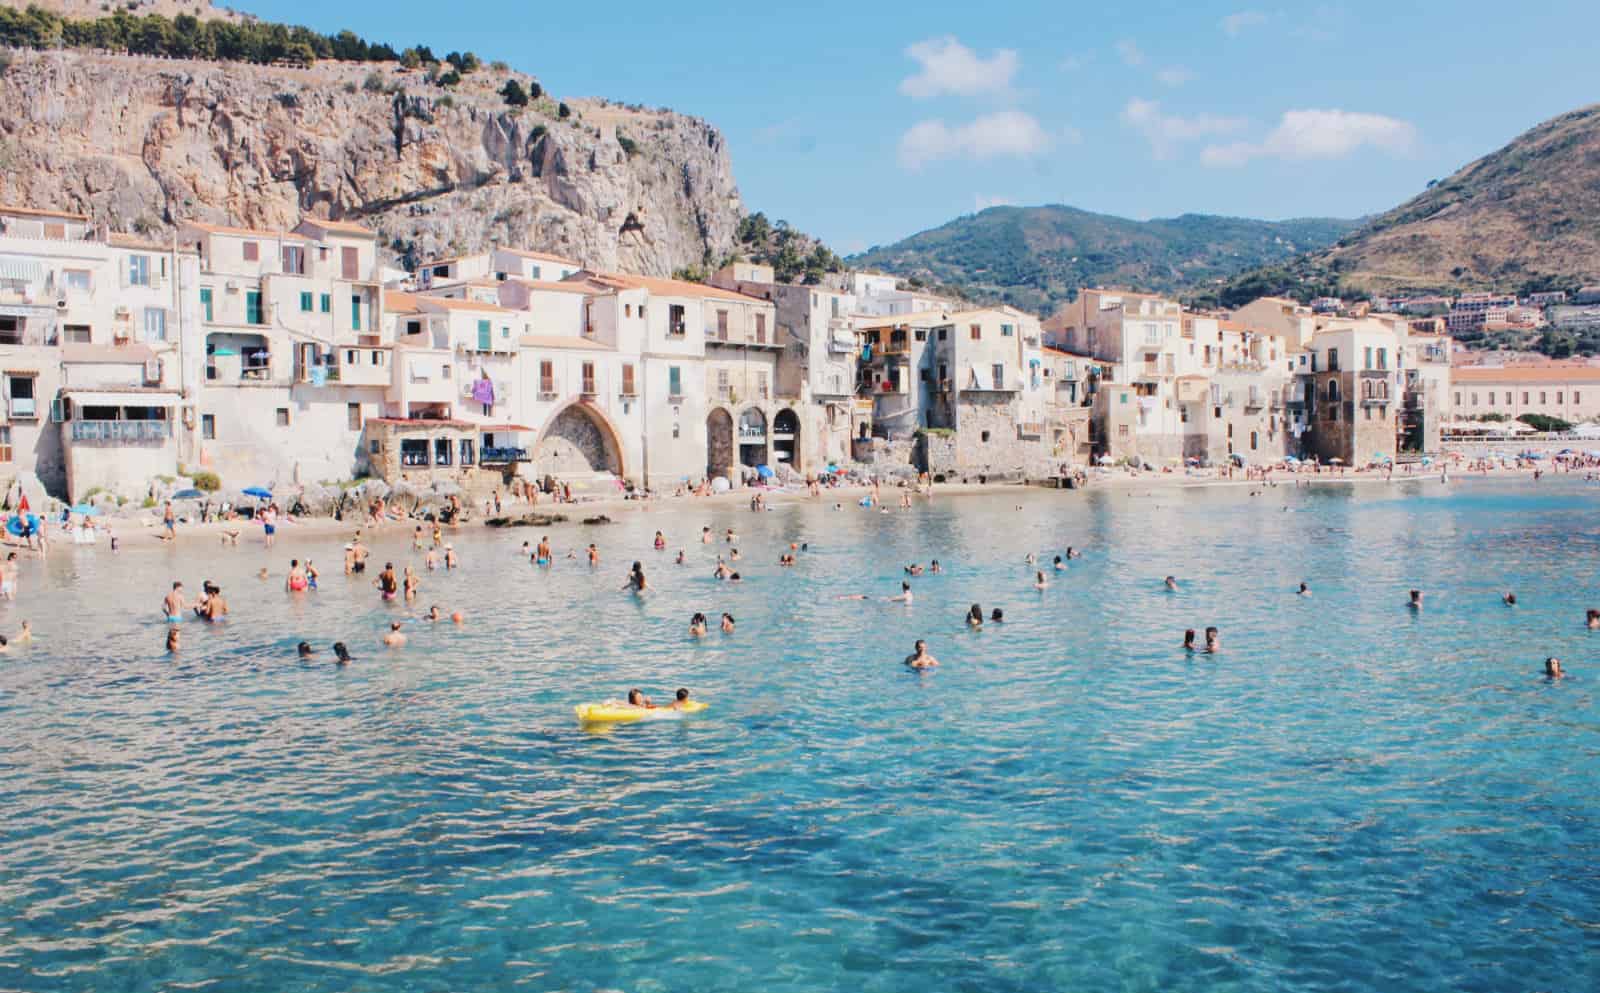 Tourists swimming in the crystal blue ocean waters of eastern Sicily.